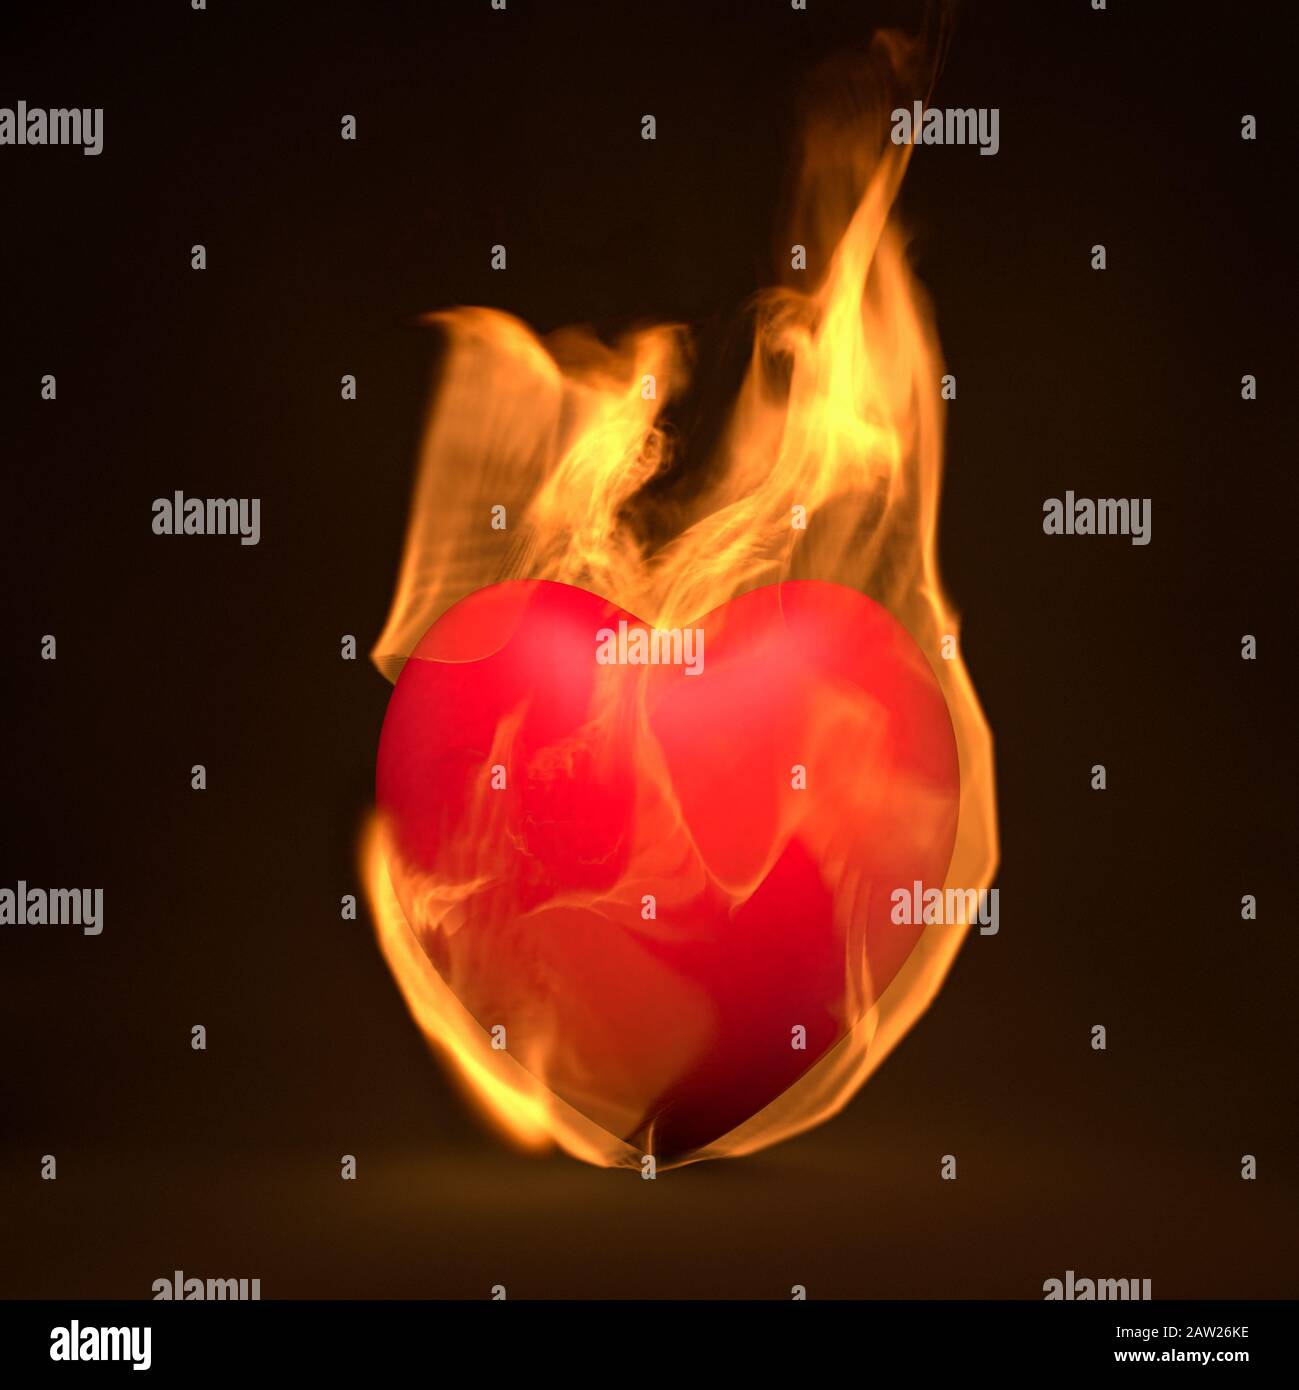 Red heart on fire, burning in flames, passion concept Stock Photo